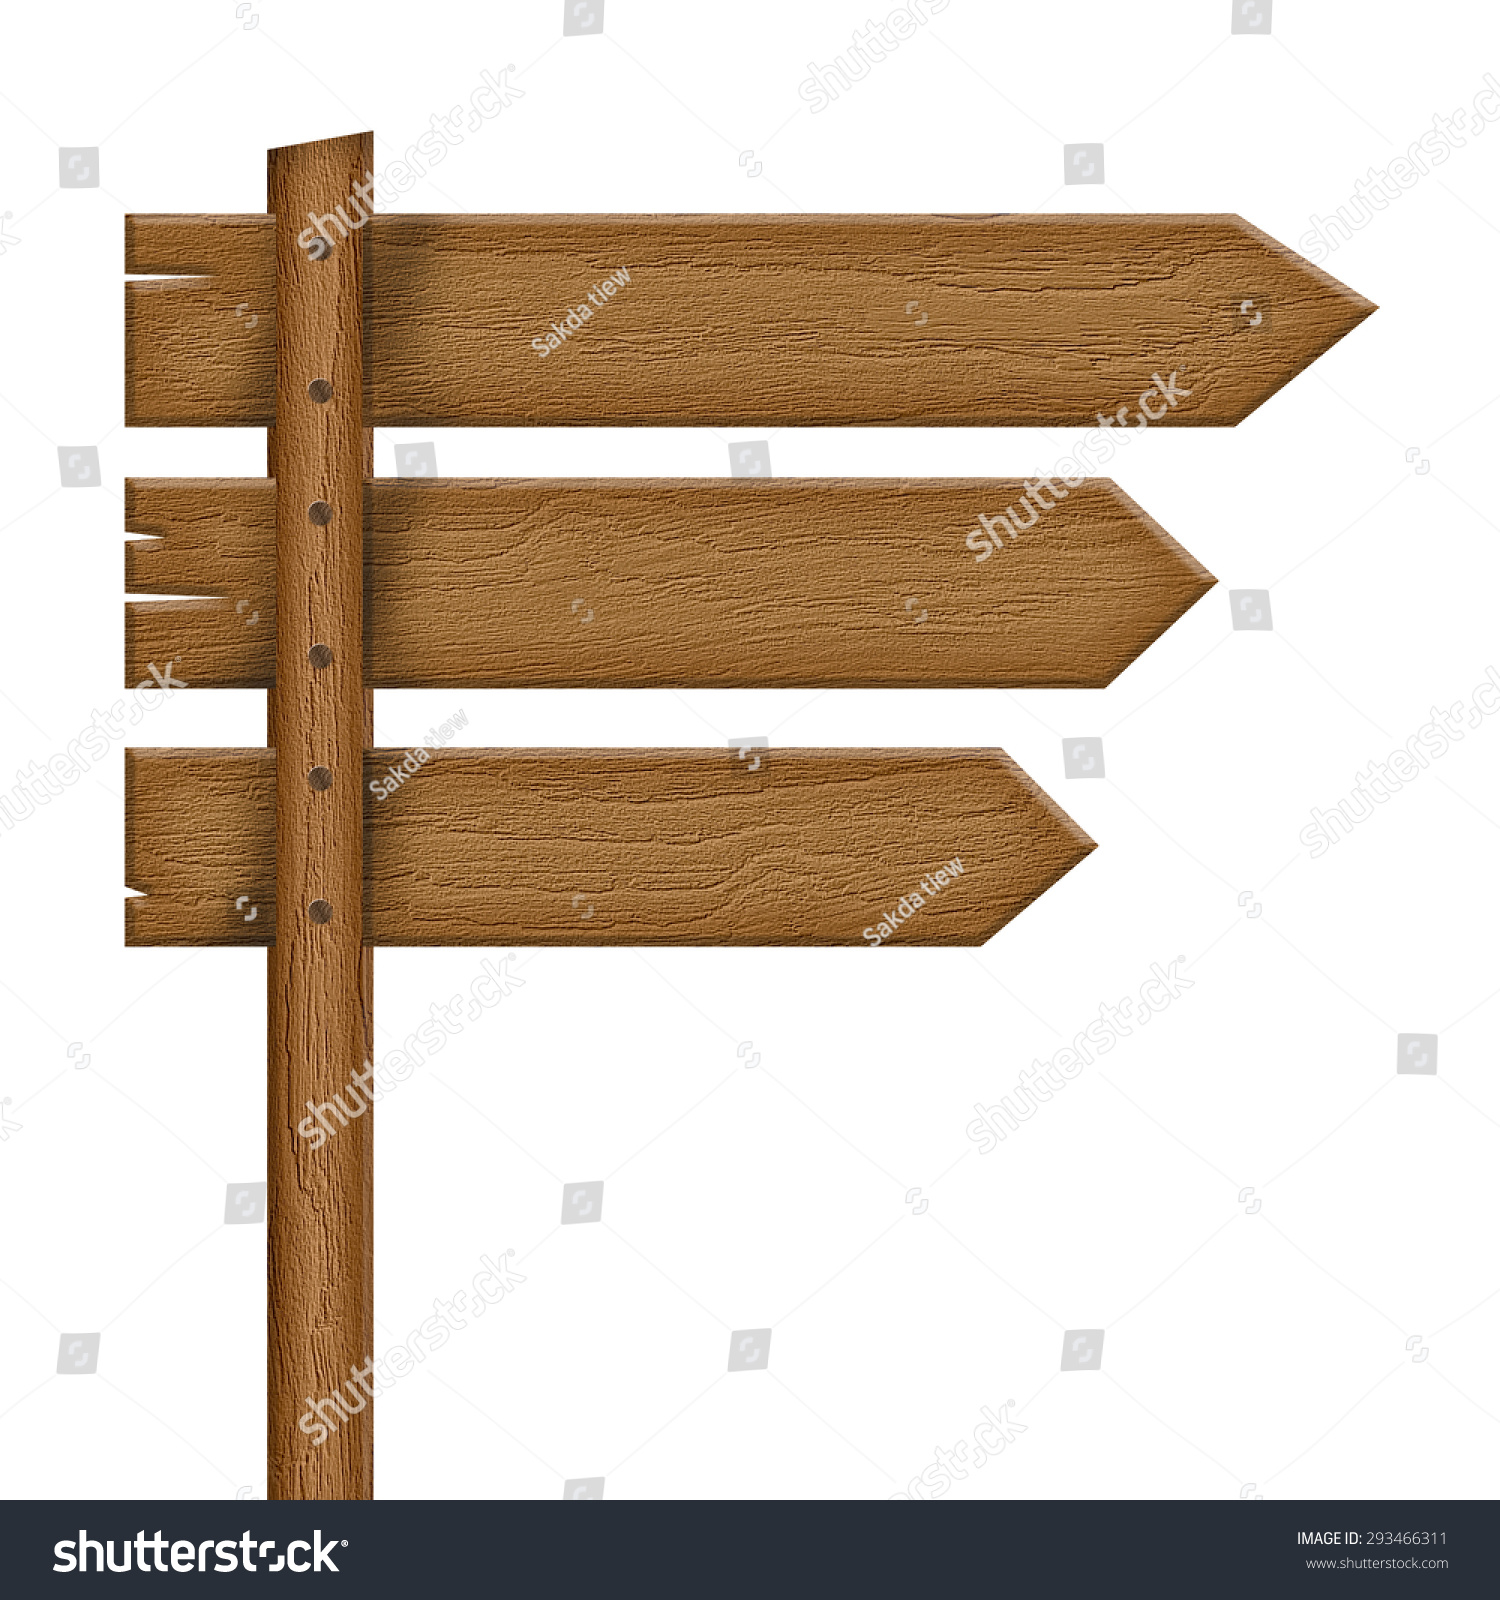 Wooden Sign Isolated On White Stock Illustration 293466311 ...